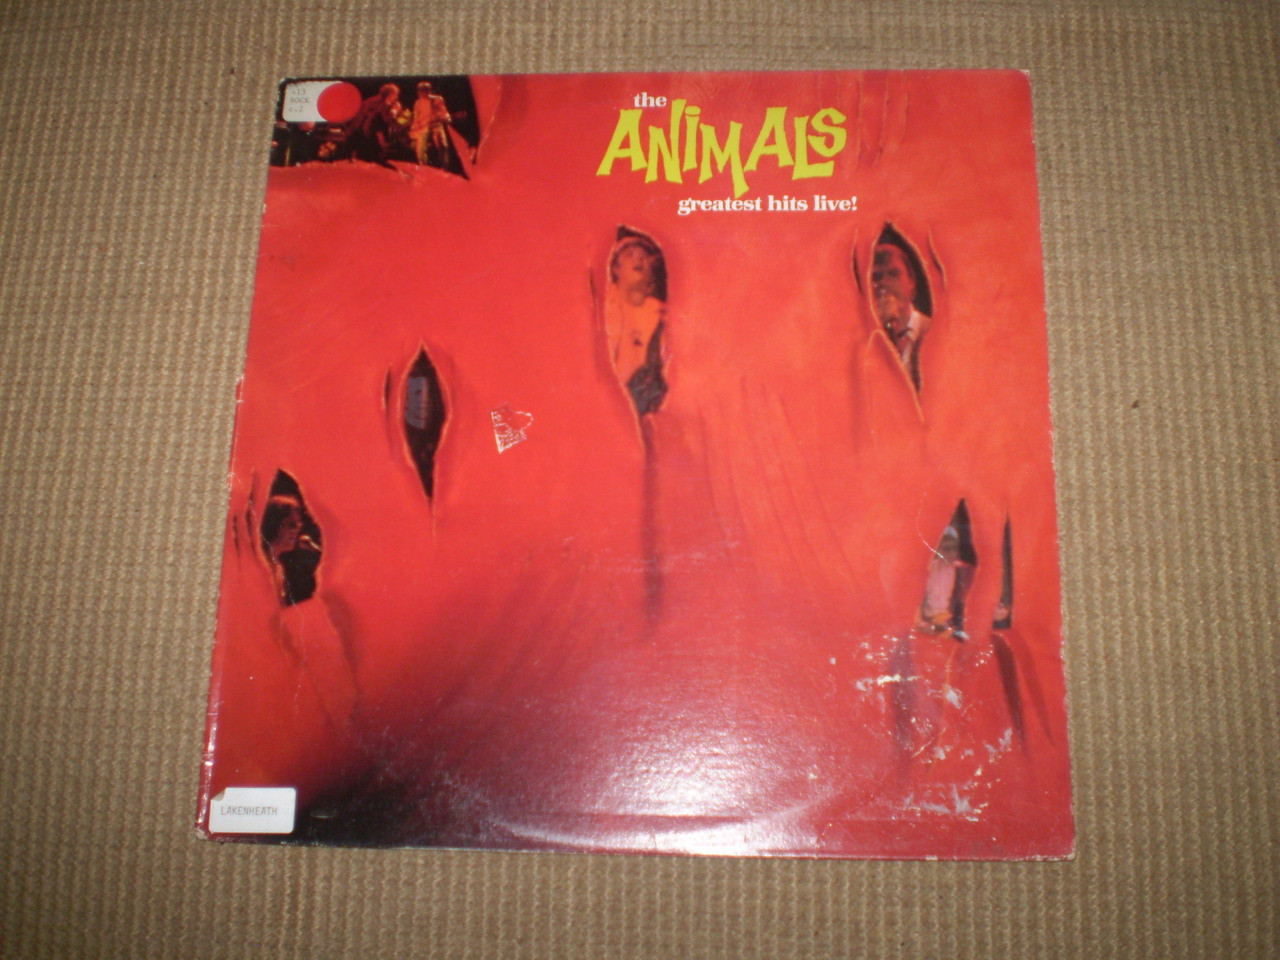 The Animals Greatest Hits Live Vinyl LP Album, Superb Vinyl, some wear to  cover - The Garden Room